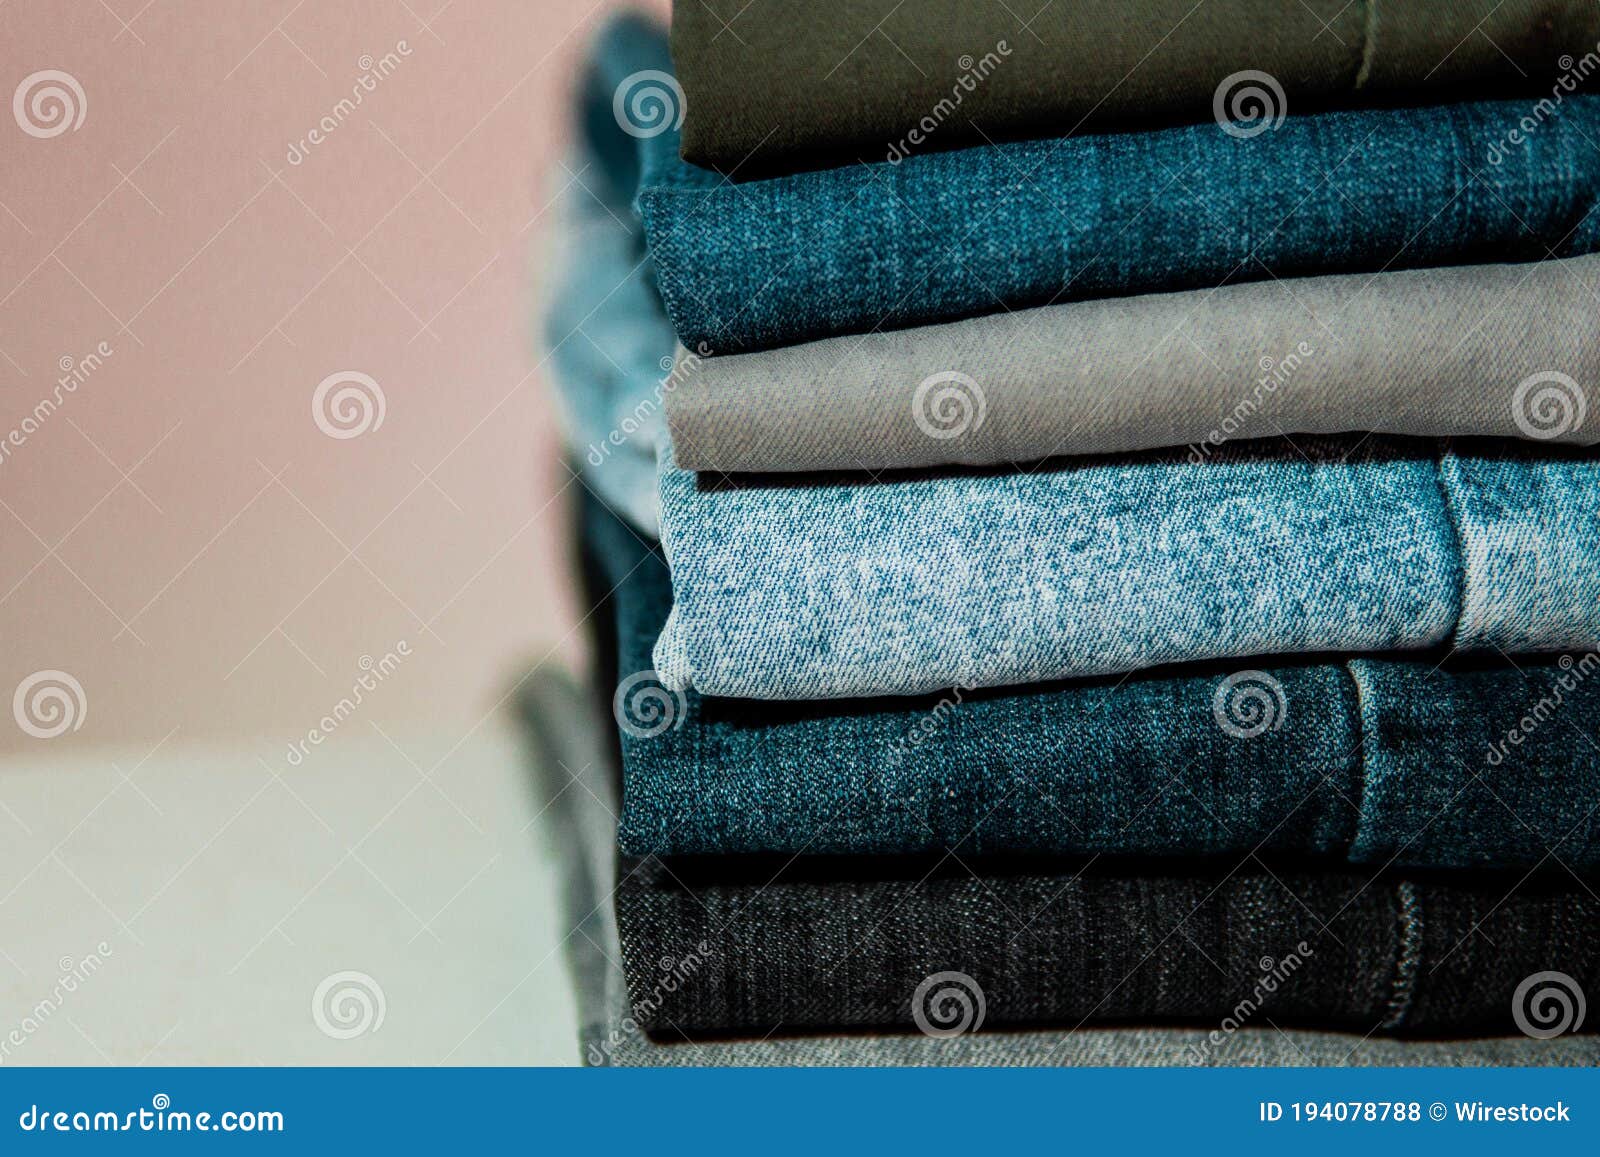 Stack of Neatly Folded Jeans Stock Photo - Image of comfort, woven ...